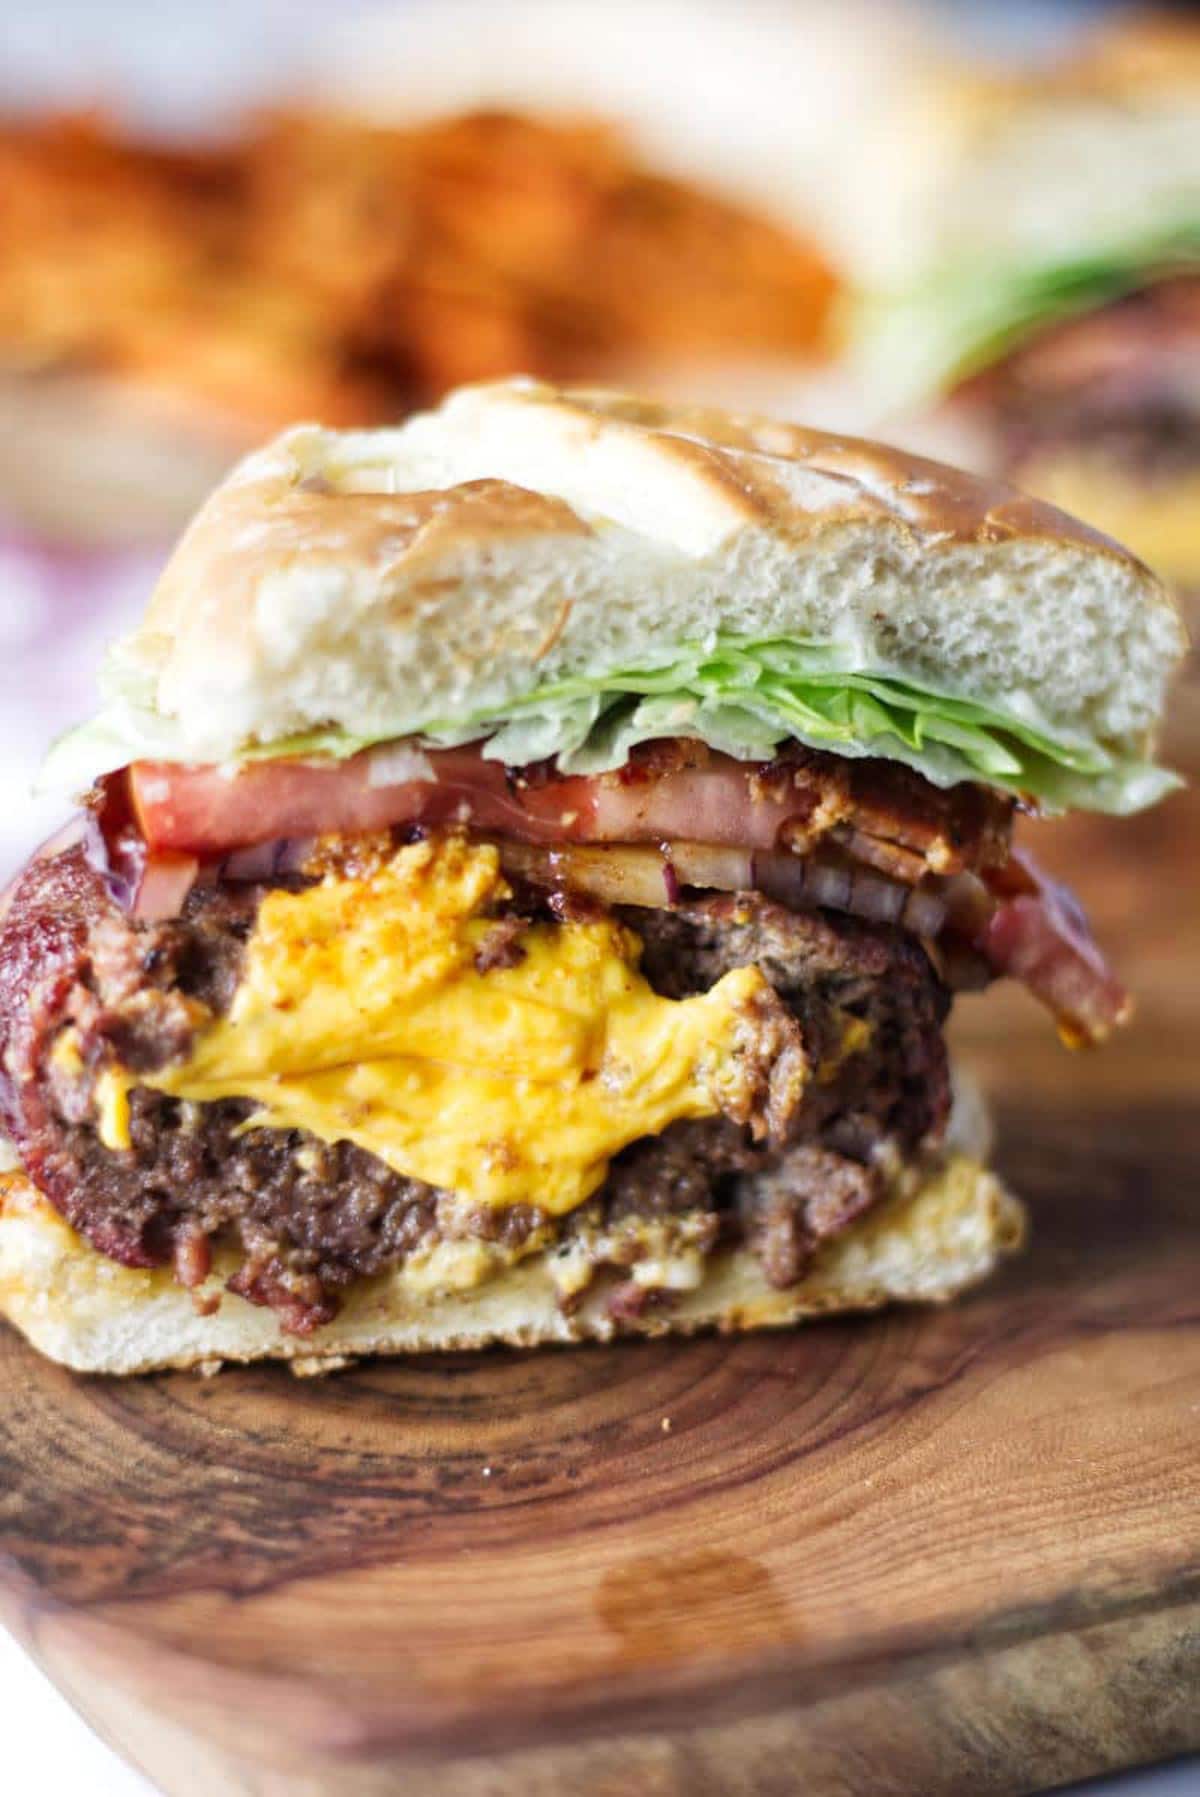 A burger cross section, sitting on a wood cutting board, cheese spilling out the middle with bacon, onion, tomato, lettuce.